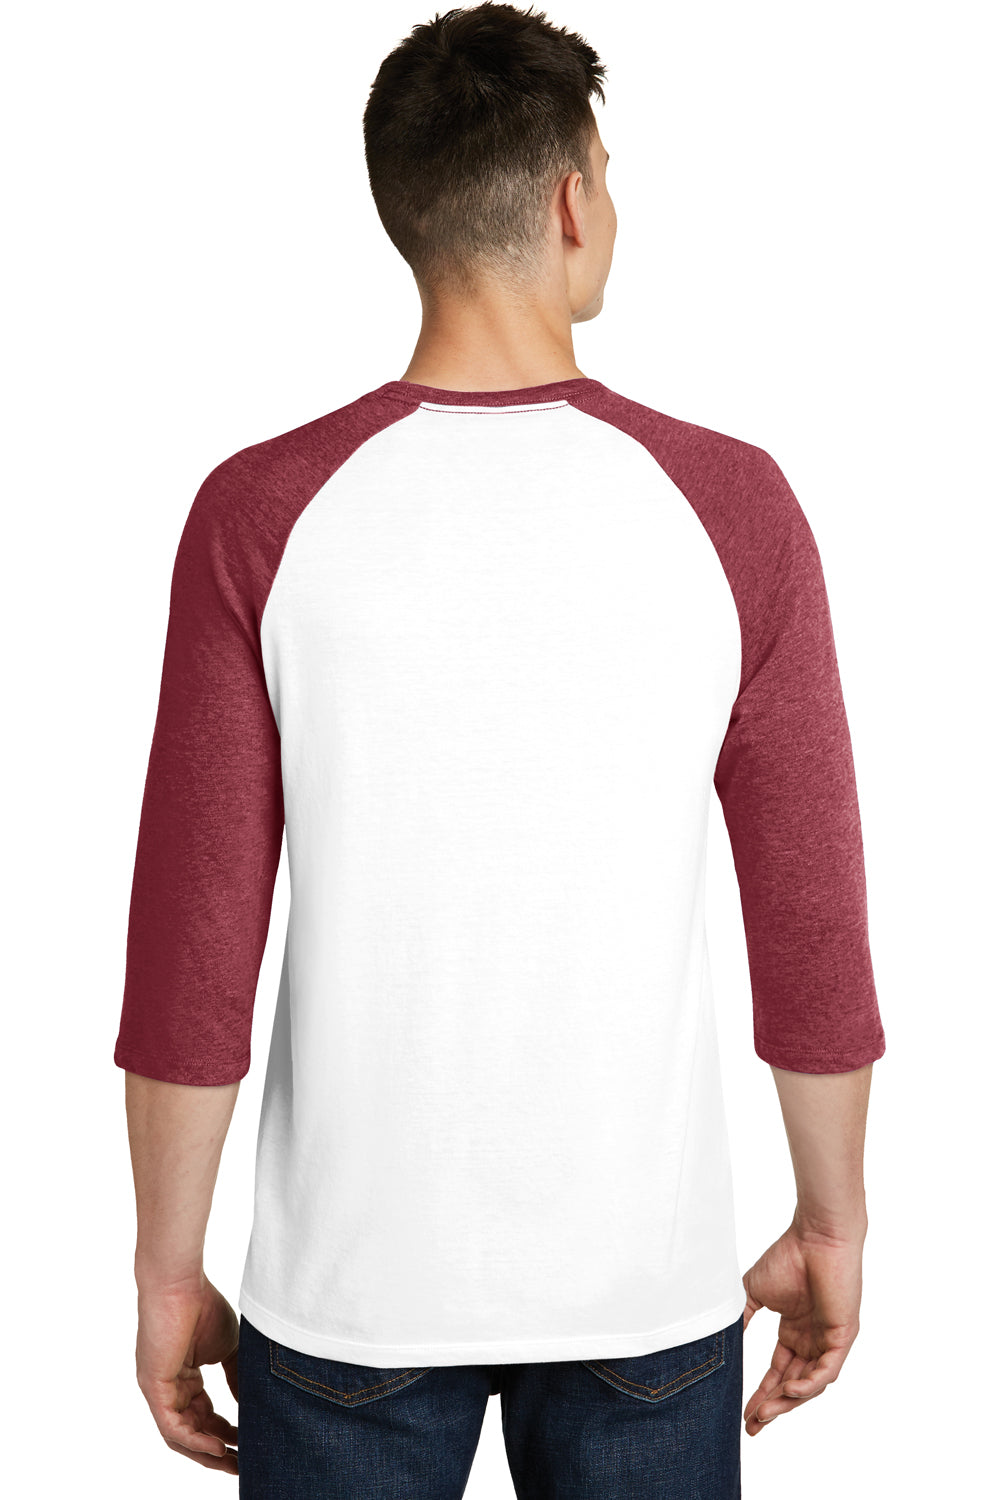 District DT6210 Mens Very Important 3/4 Sleeve Crewneck T-Shirt White/Heather Red Back